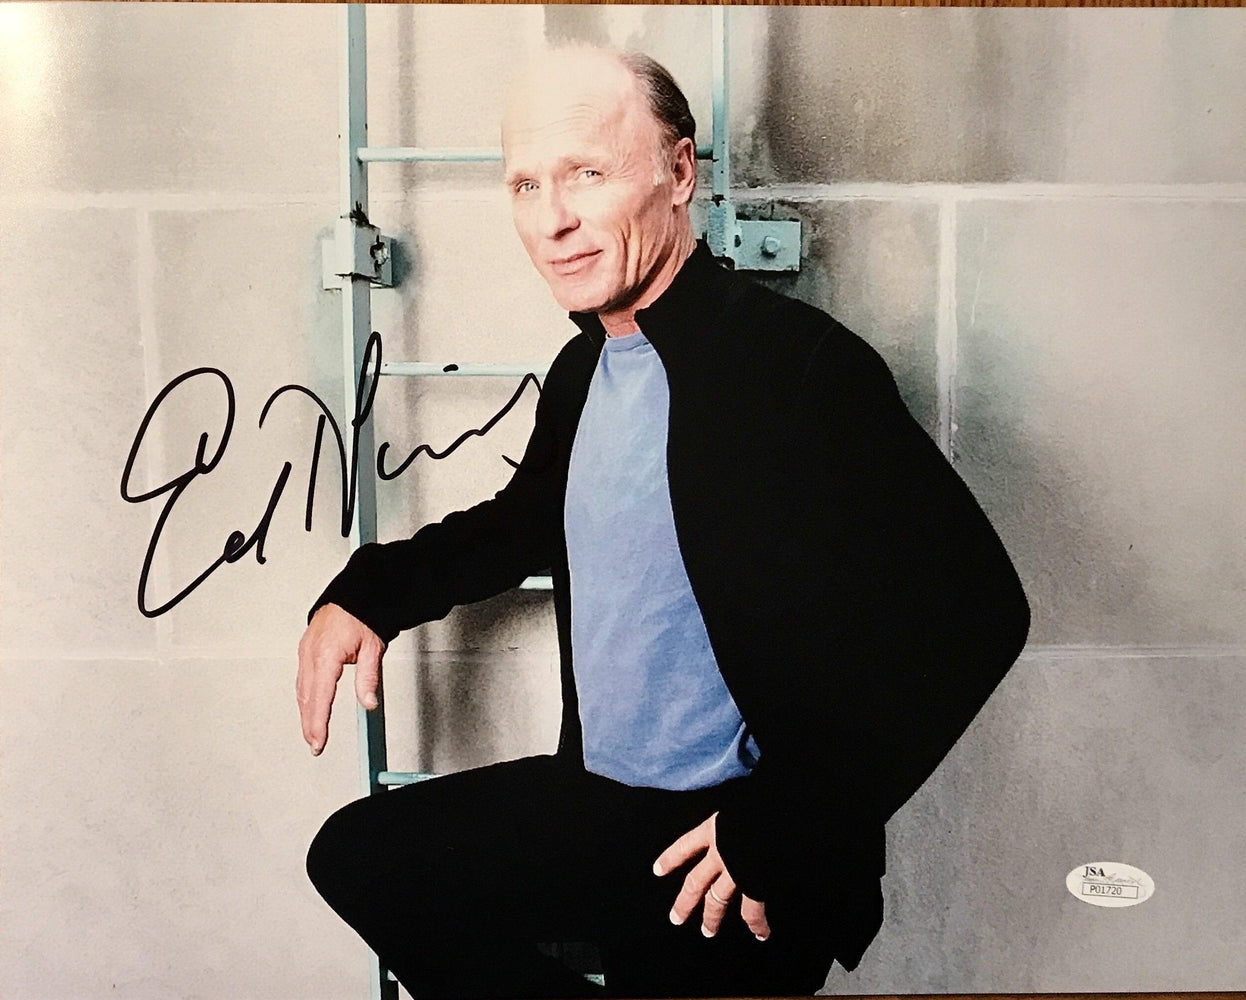 ed harris signed 11x14 as the man in black from westworld jsa p01720 certificate of authenticity